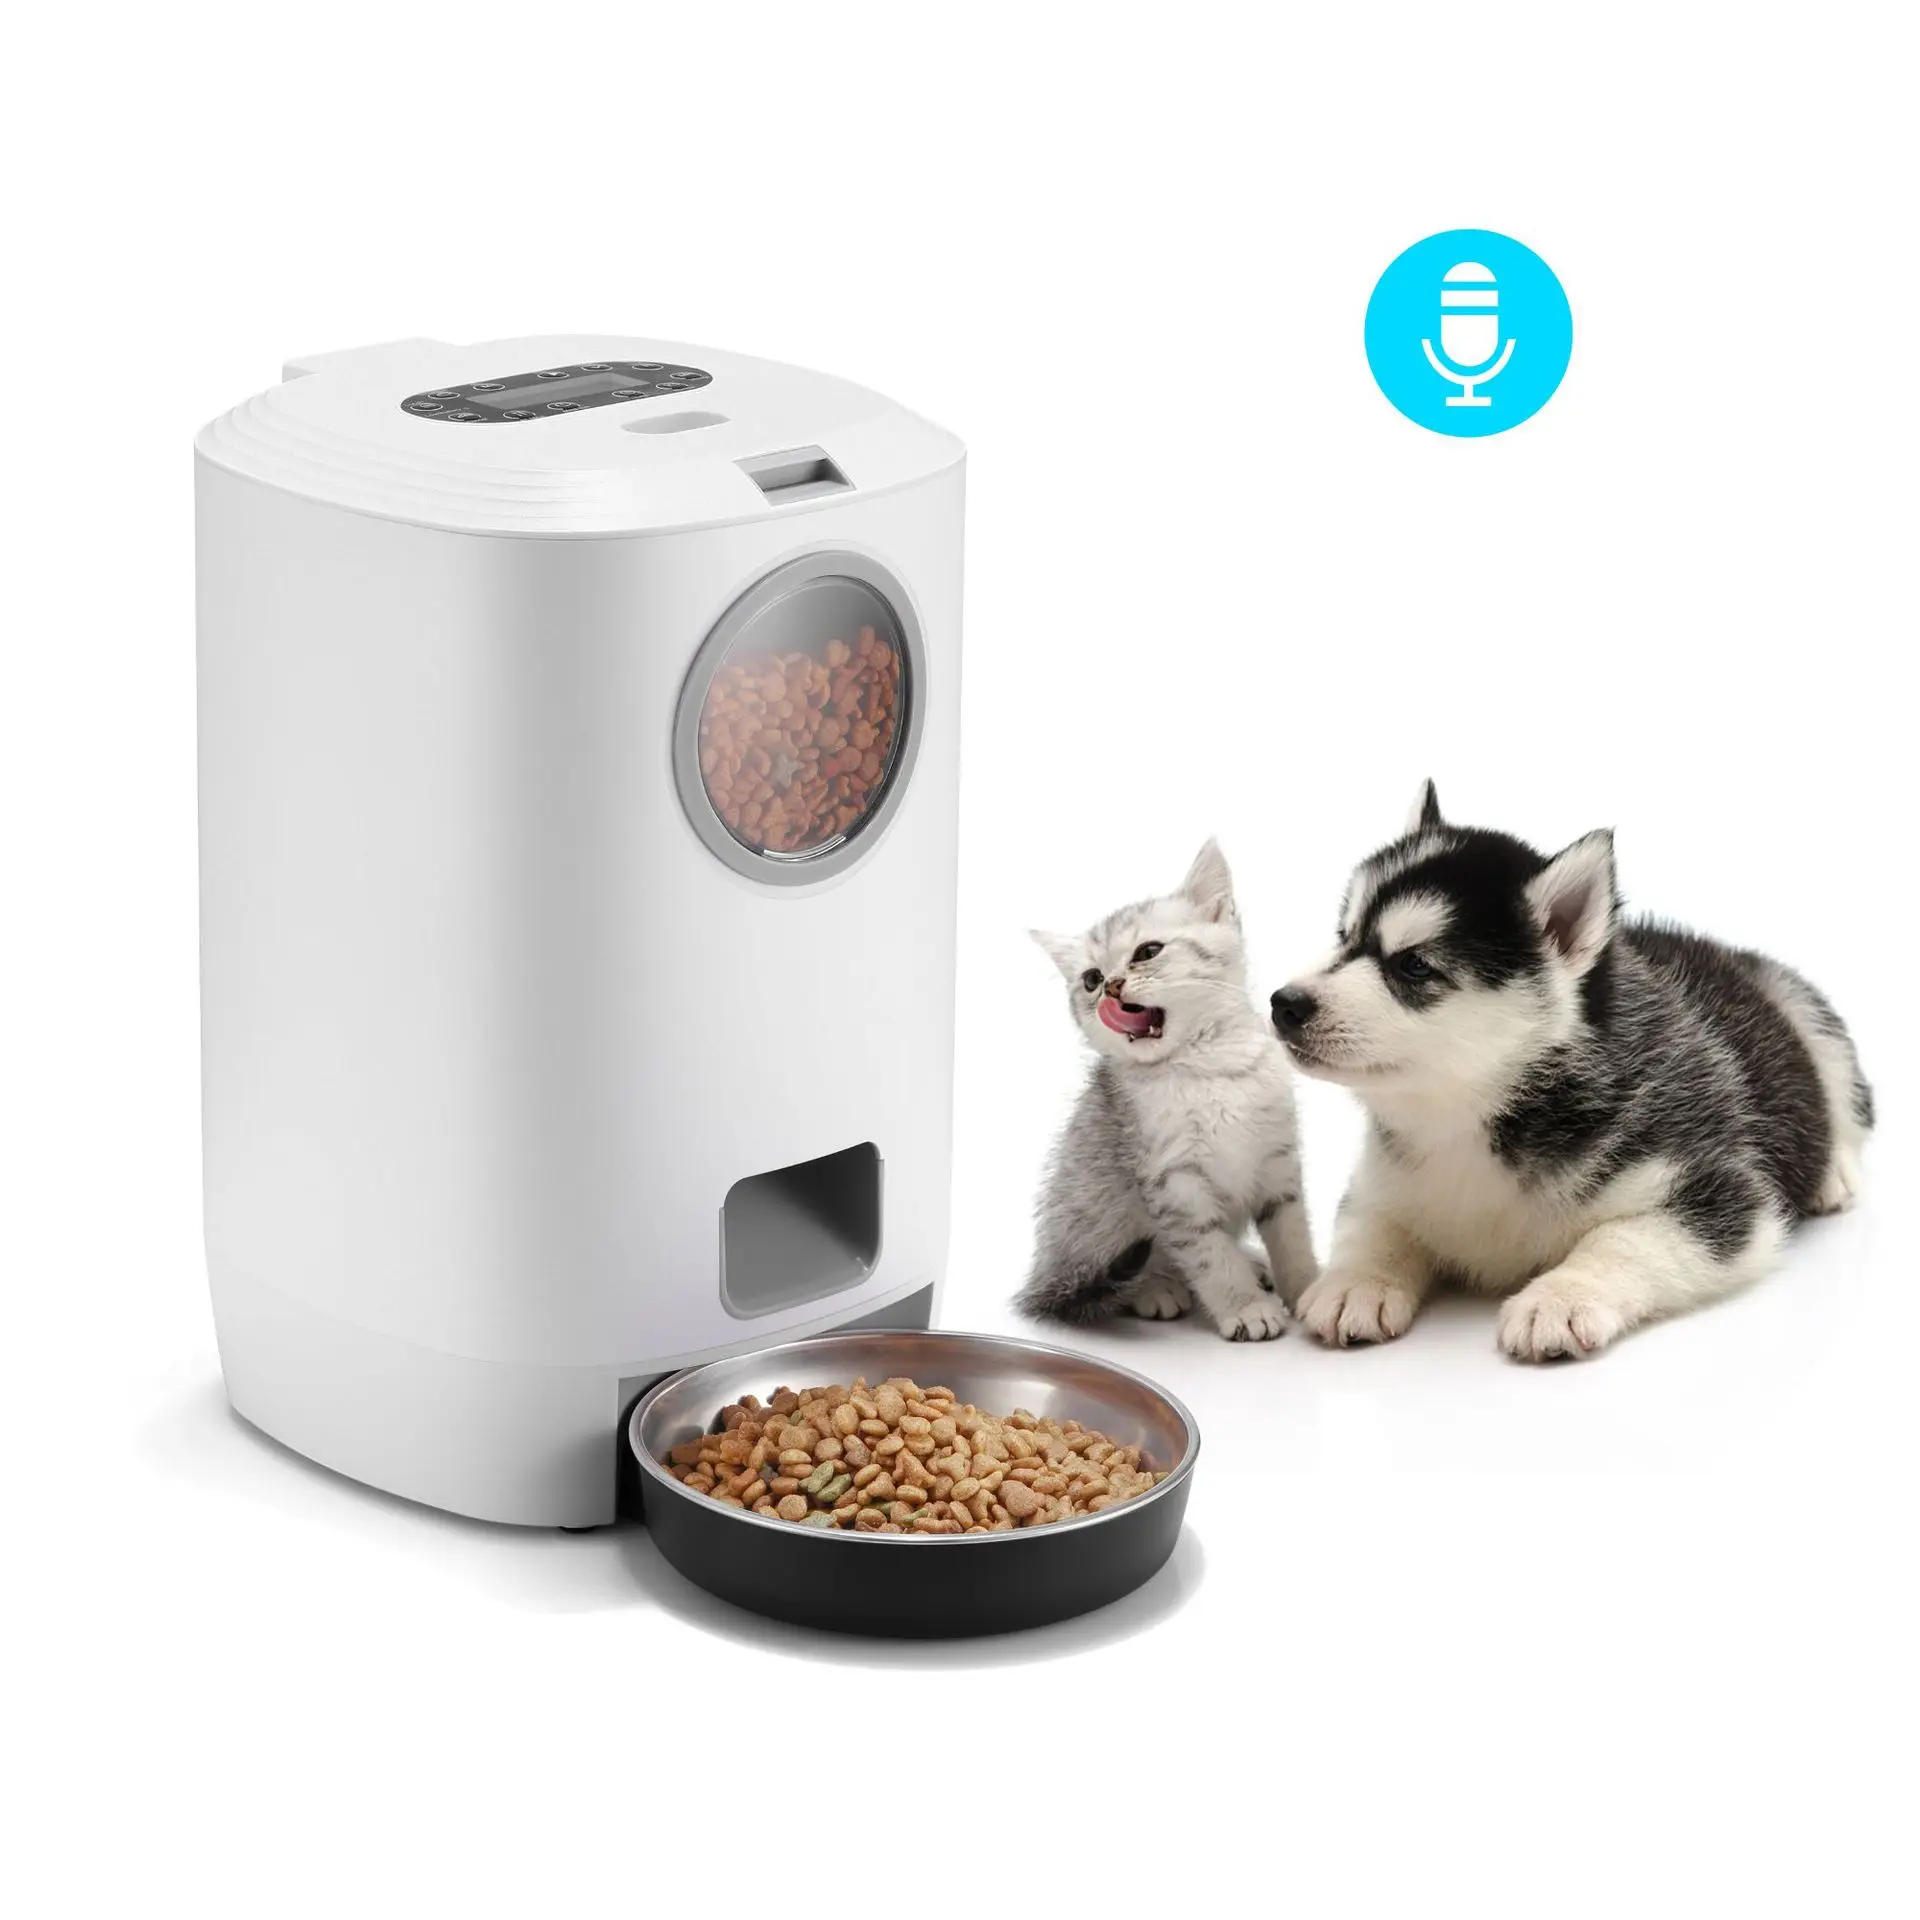 

Automatic Pet Feeder Cat And Dog intelligent Timing Remote Control Feeding Pet Food Dispenser, White